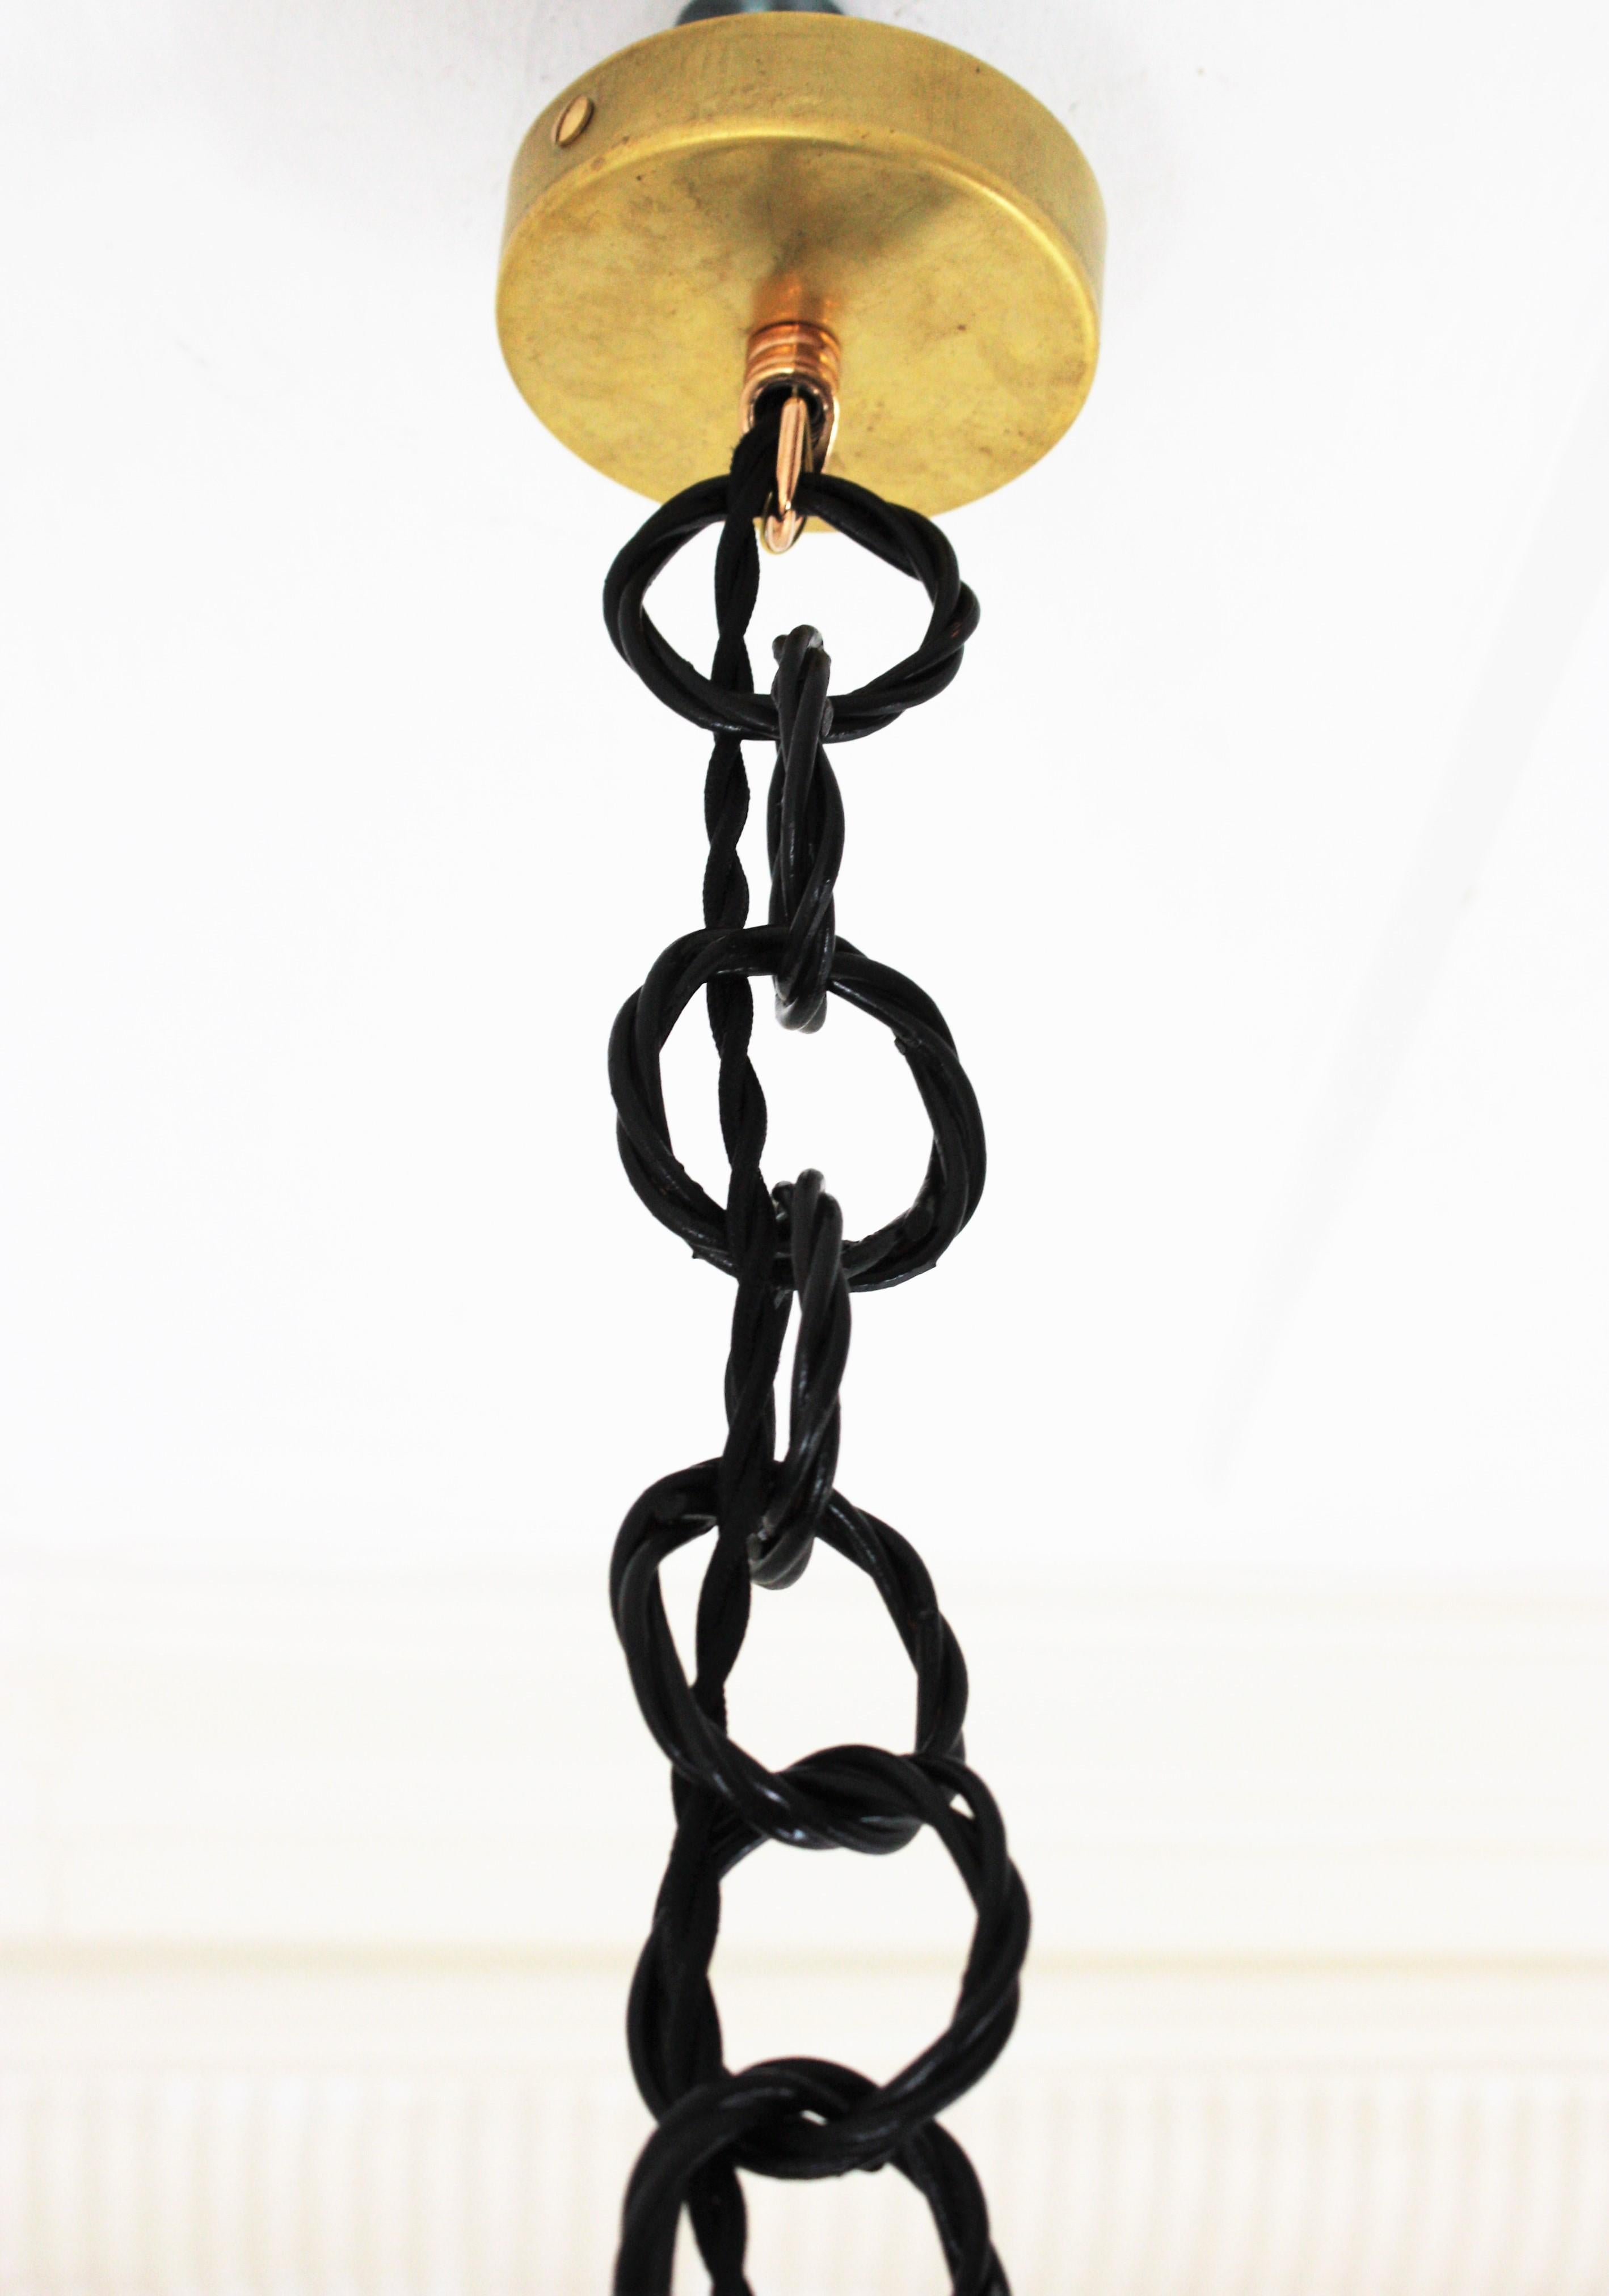 Rattan Bell Pendant or Hanging Light in Black Patina, Spain, 1960s For Sale 4